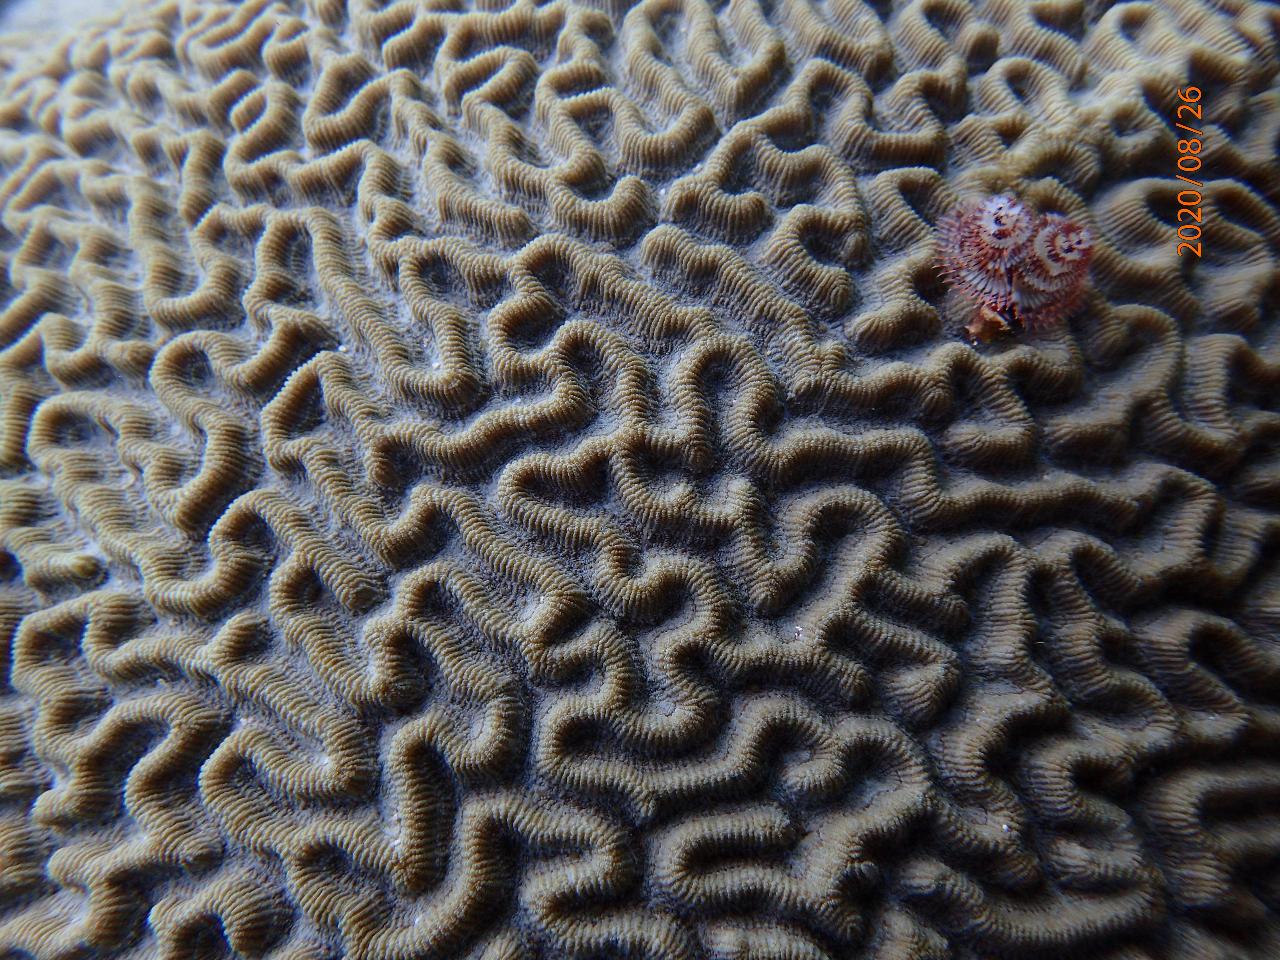 AWARE Coral Conservation